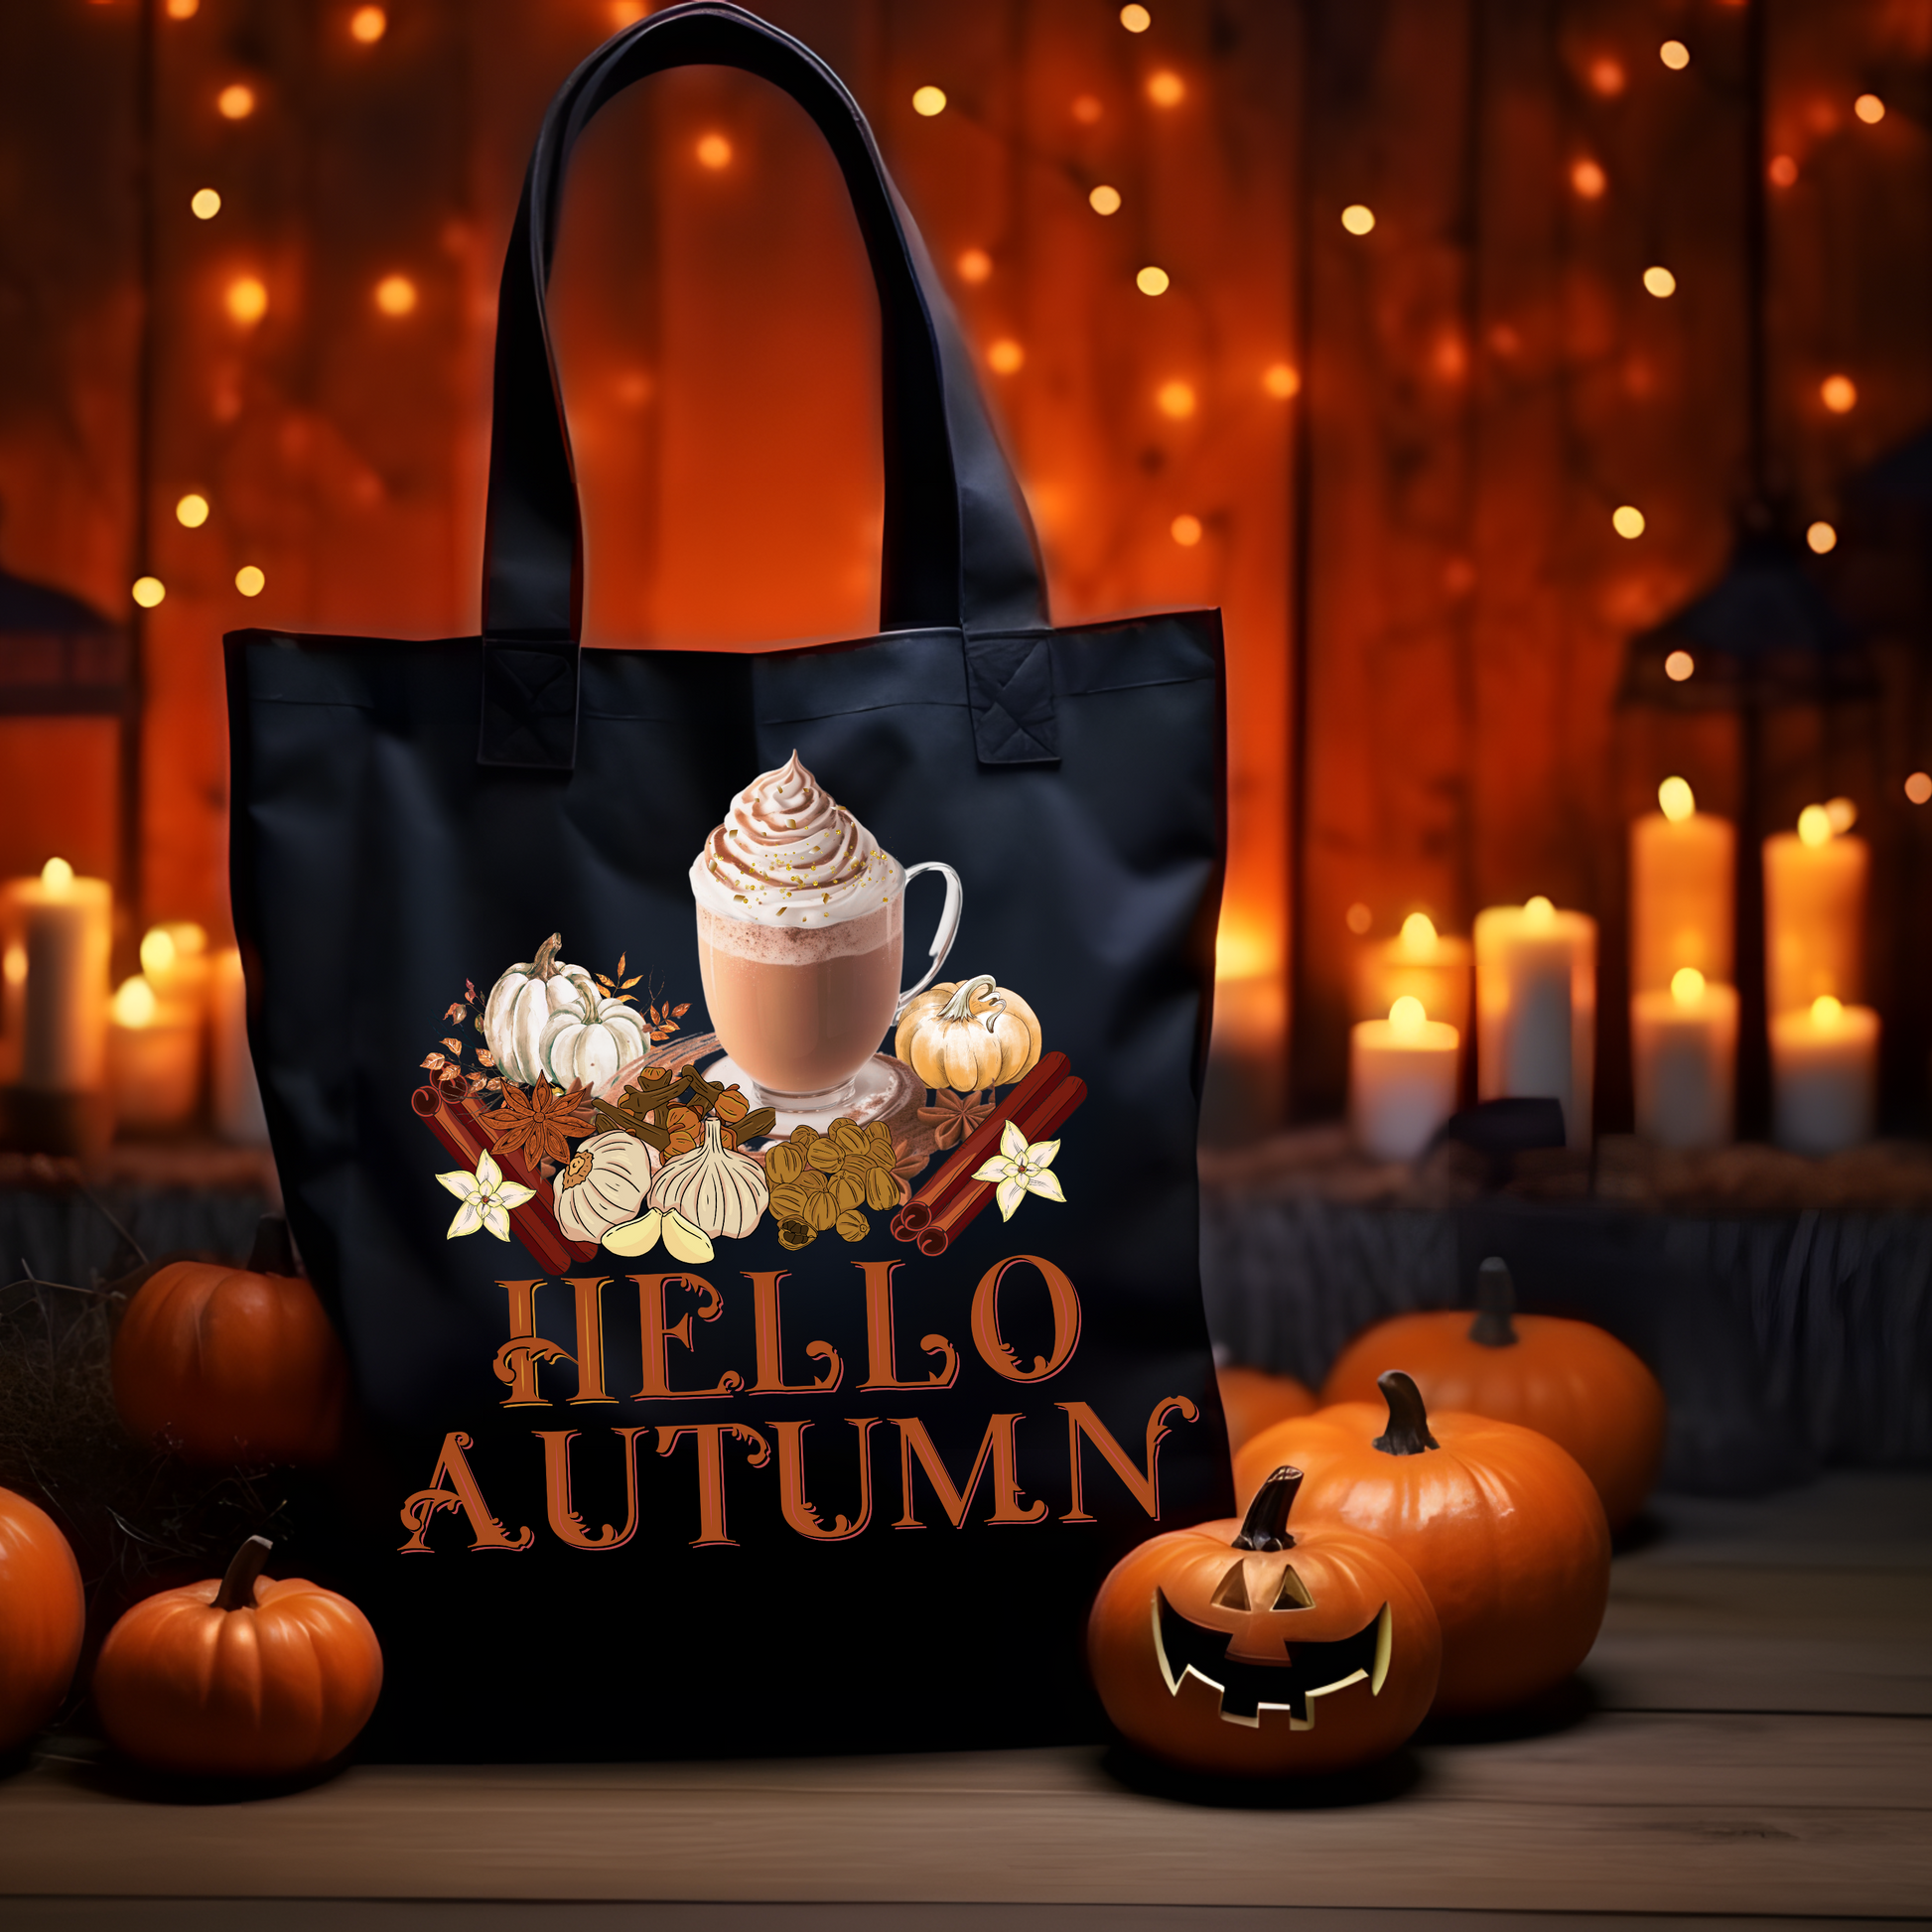 Pumpkin Spice Latte Spices Tote Bag - Fall Fashion, Hello Autumn - Cute Polyester Tote Bag, Perfect Gift for Birthdays and Fall Bags   